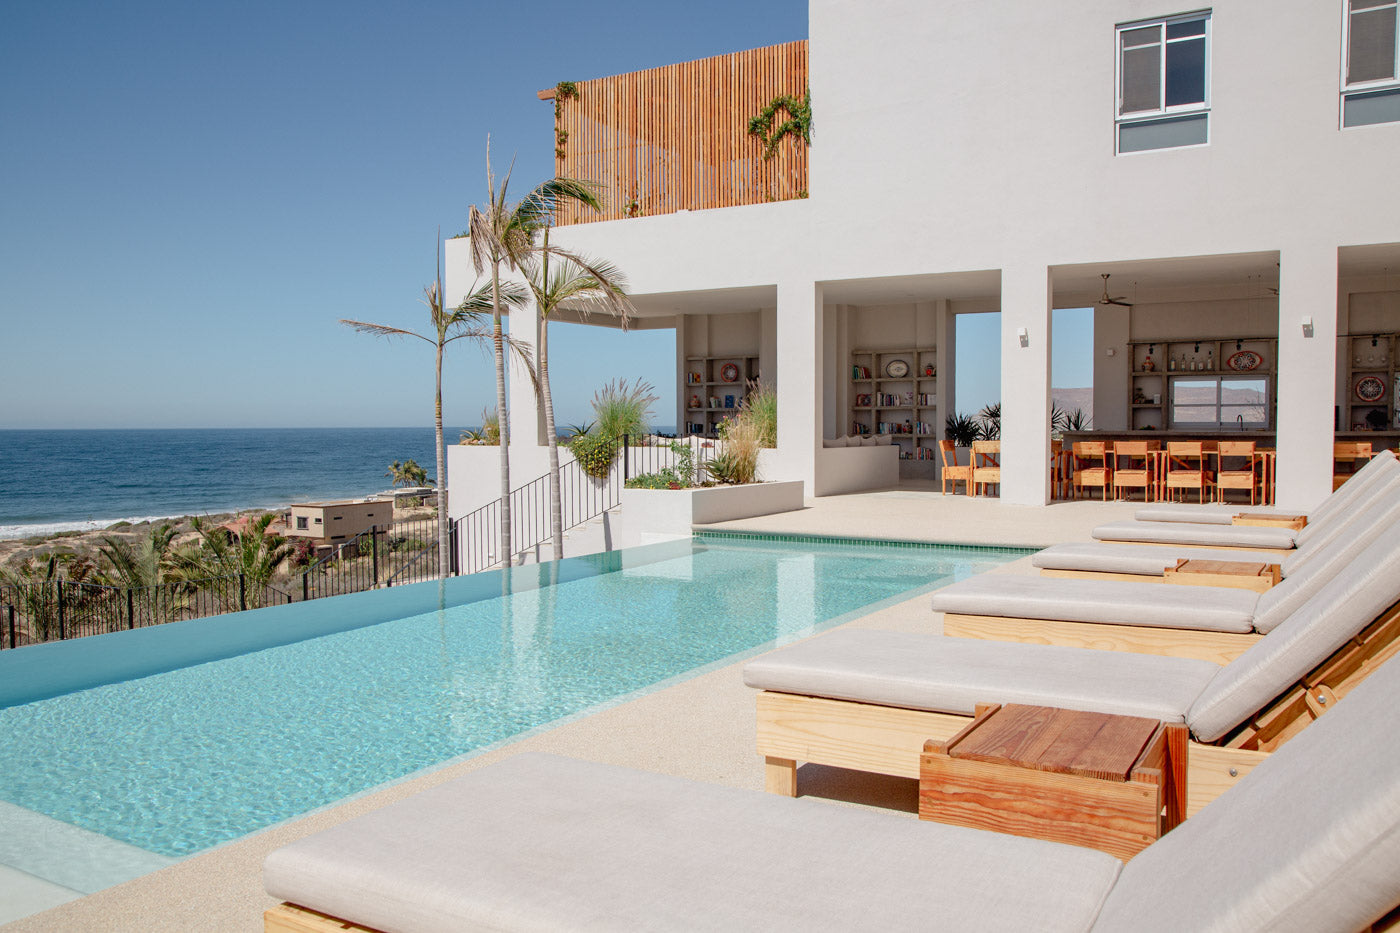 Image of pool and accommodations for the soulside mexico spring renewal and recovery yoga retreat